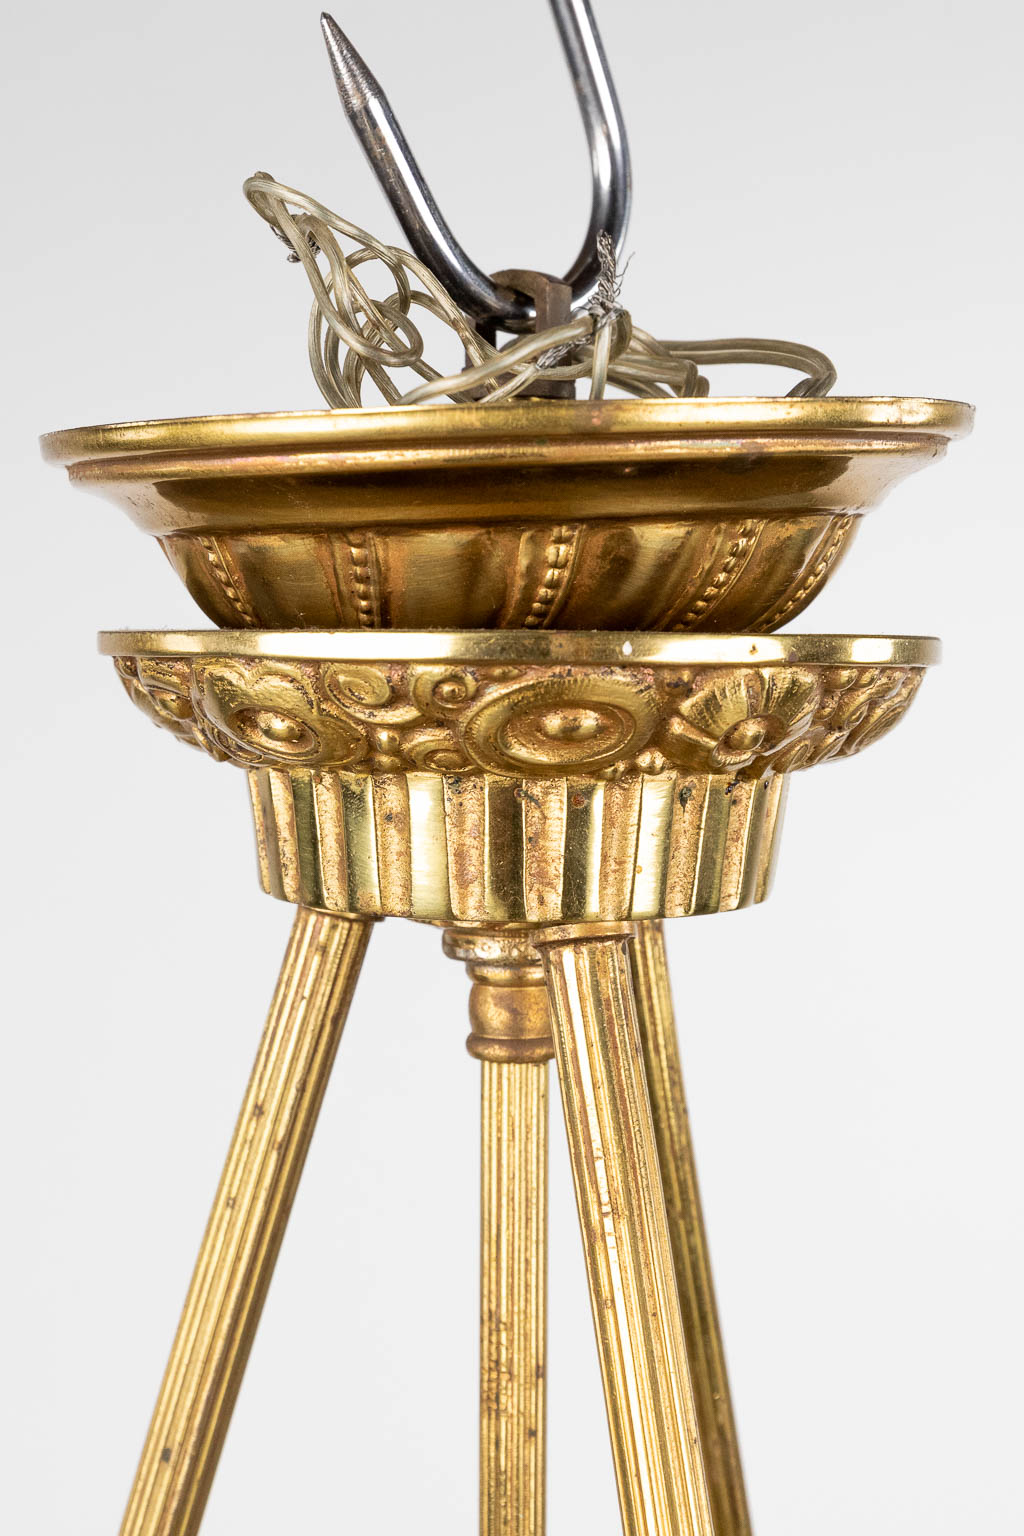 A chandelier made of bronze with an alabaster bowl and glass shades. (H: 64 x D: 80 cm) - Image 7 of 12